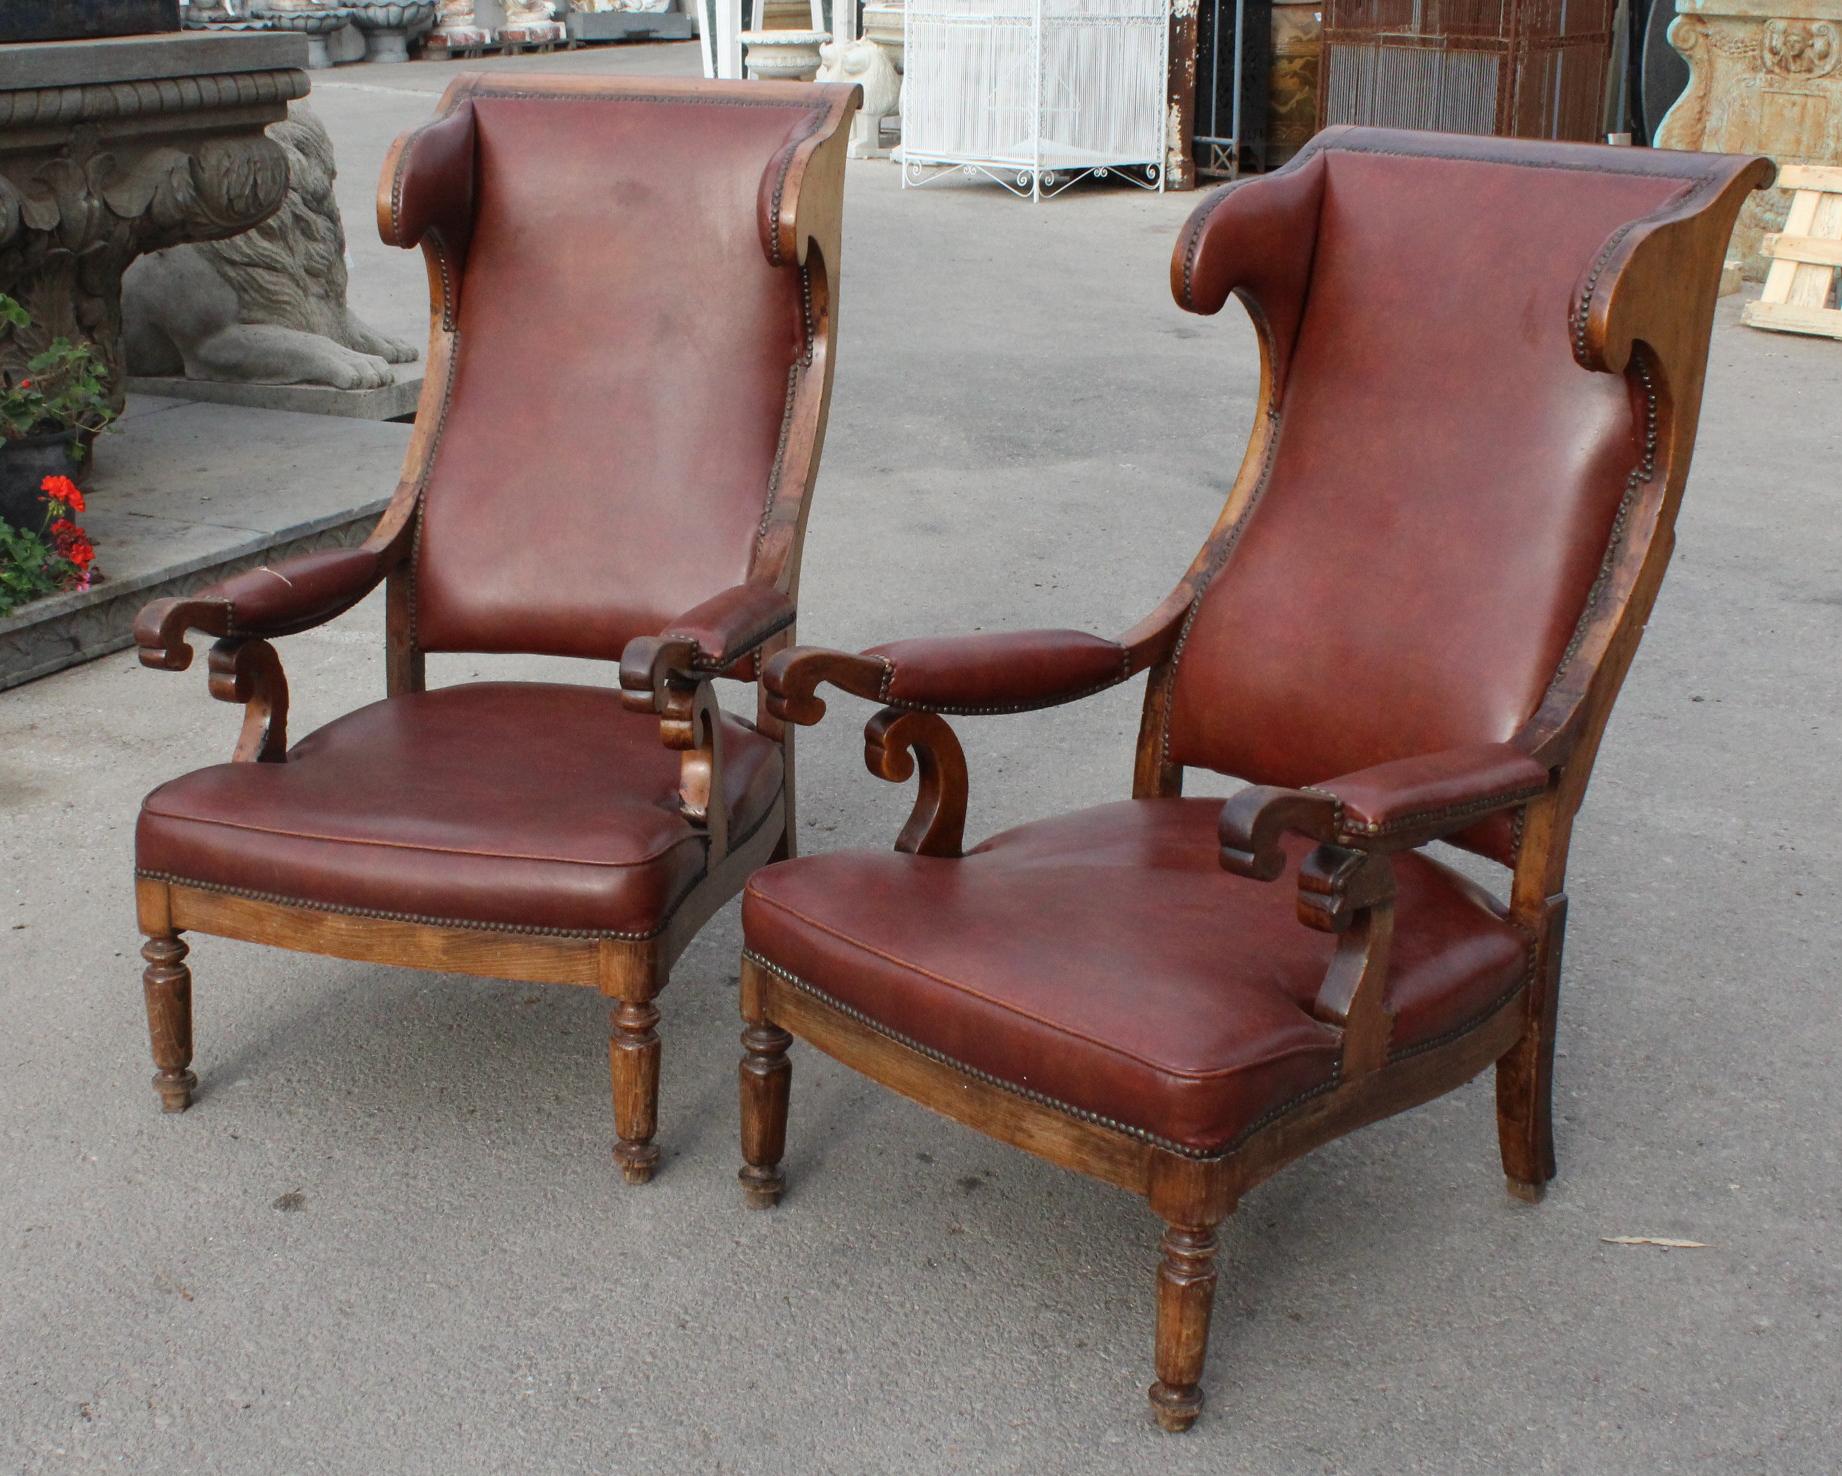 19th century pair of French walnut leatherette upholstered armchairs.